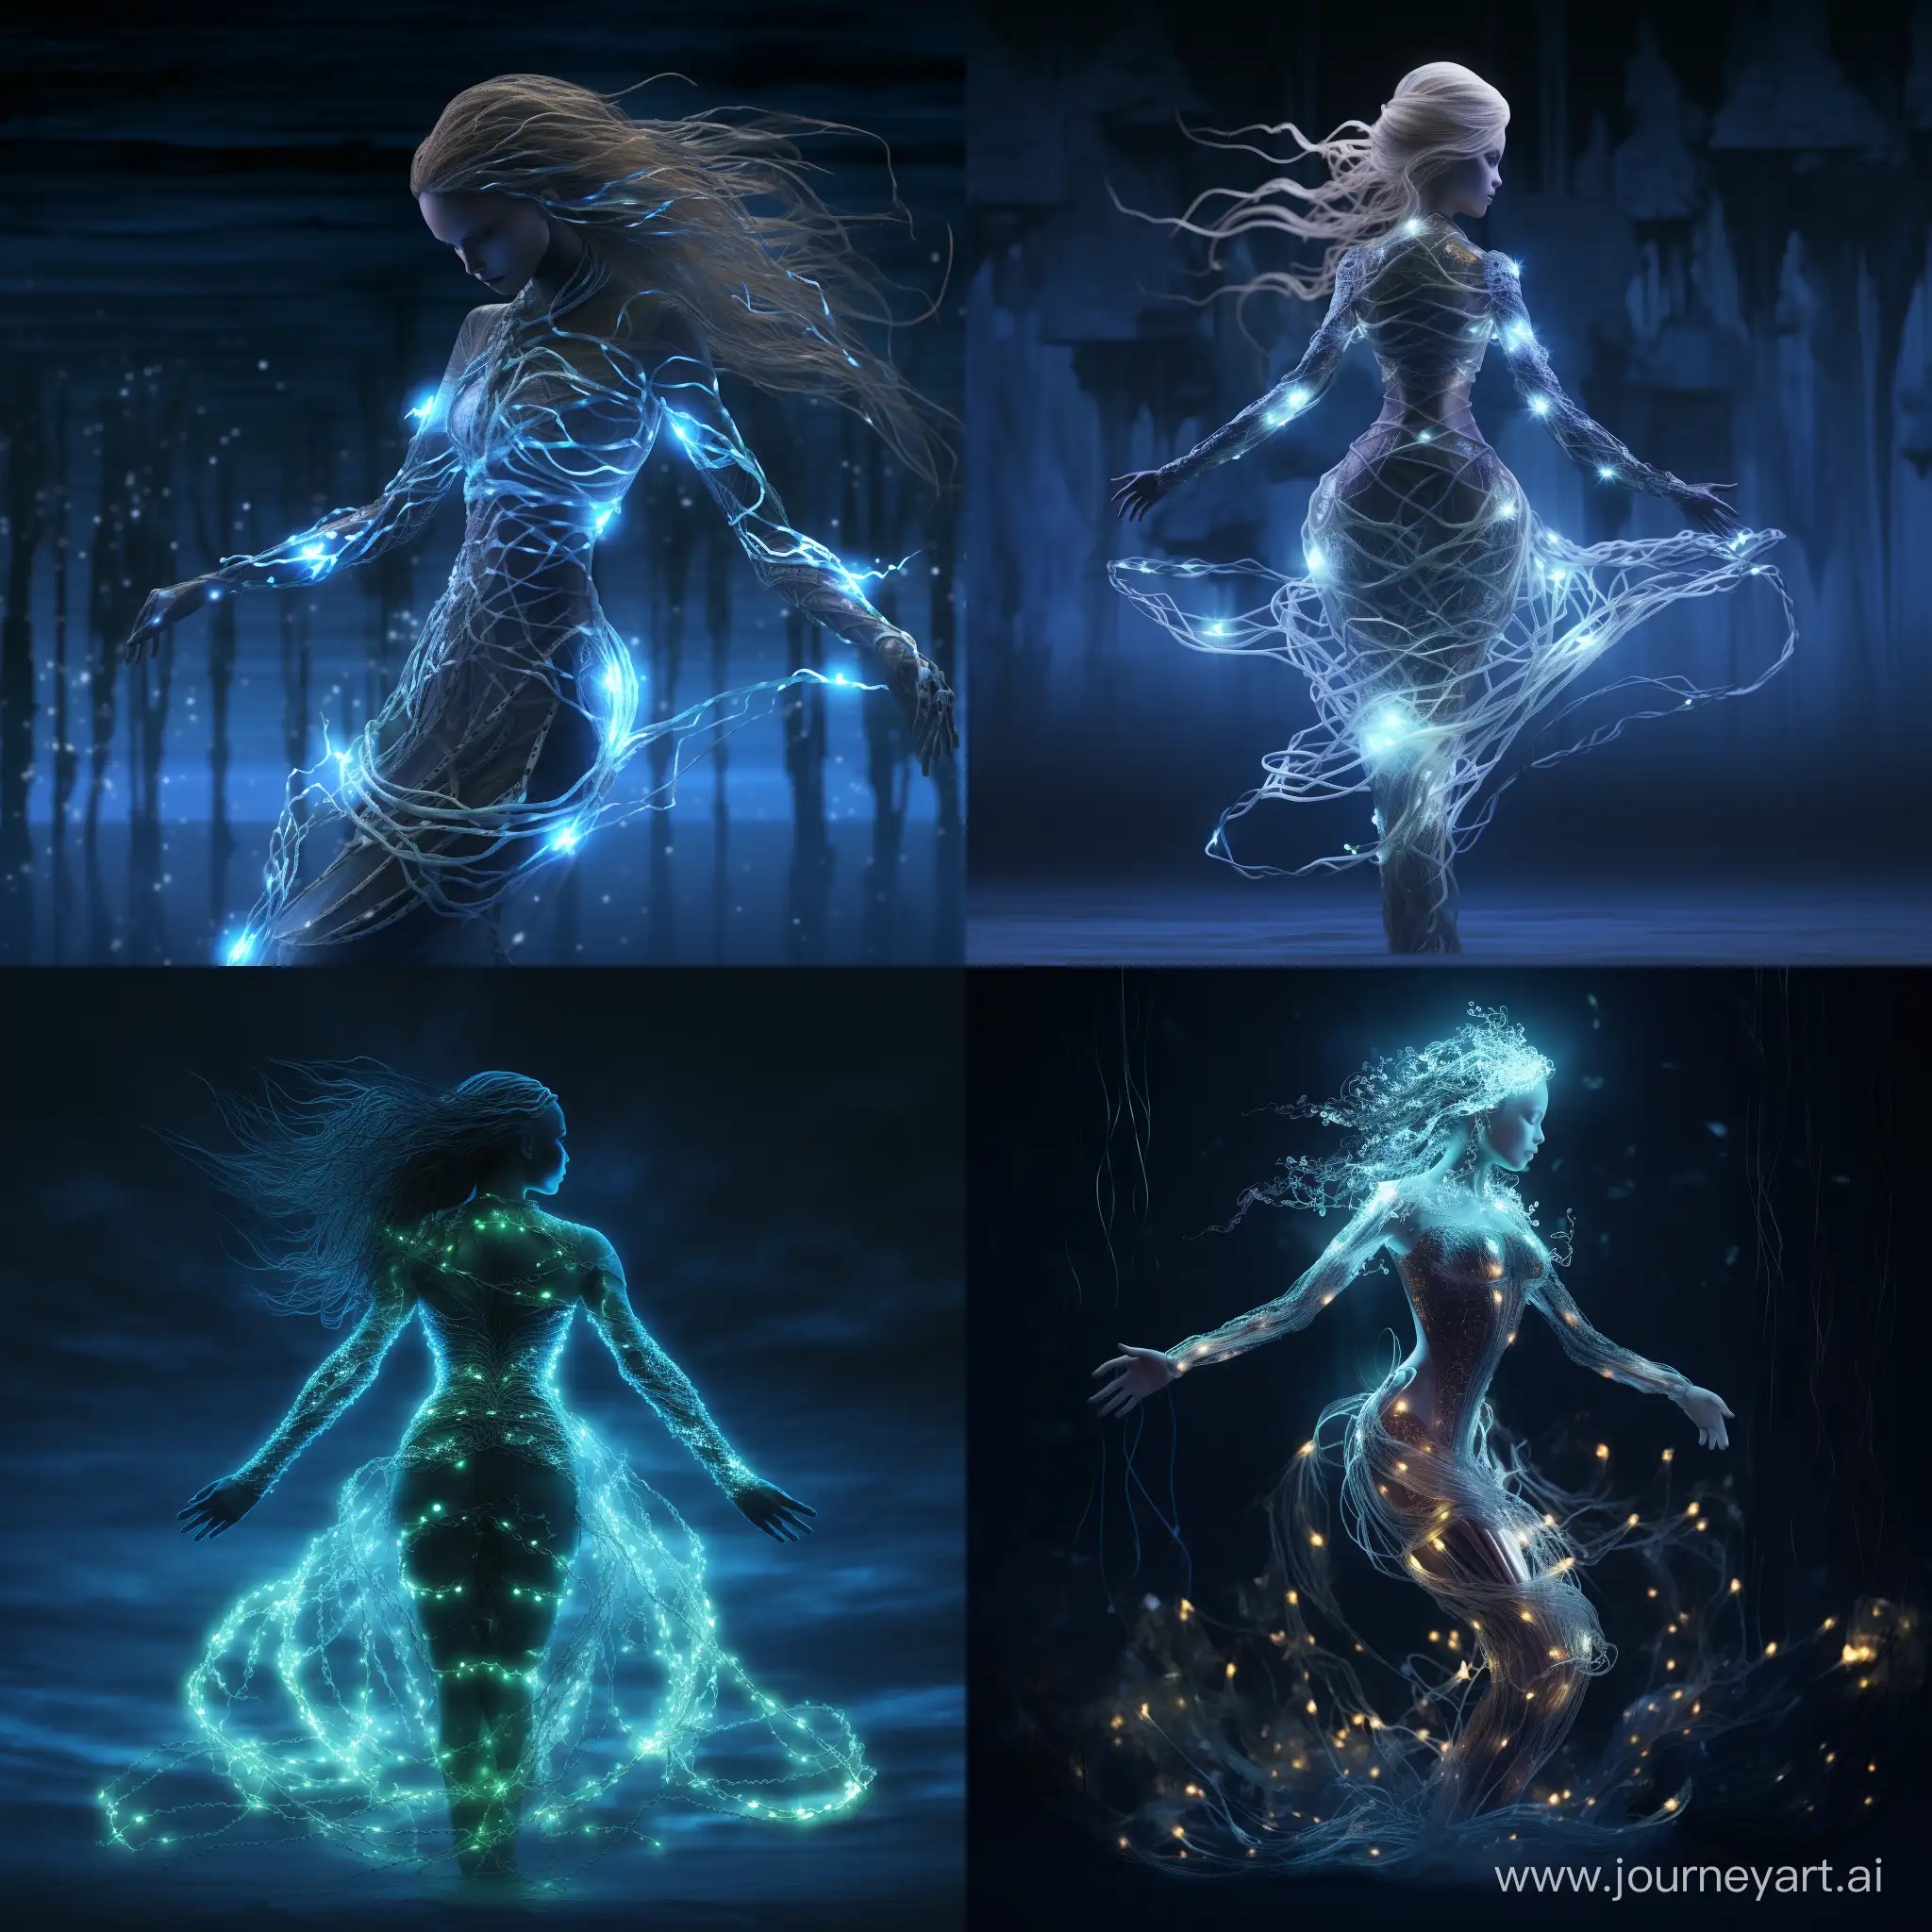 In the depths, the Electrocurrent Mermaid commands attention with scales that mimic the luminescence of bioluminescent circuitry. A mesmerizing blend of aquatic grace and electric energy, faint currents of bio-electricity dance across their sleek, hydrodynamic tails. Delicate tendrils, reminiscent of the filaments of a jellyfish, trail behind them, emitting pulses of energy as they gracefully navigate the dark depths. Their eyes gleam with a faint electric charge, reflecting both intelligence and the formidable power they wield beneath the waves.



